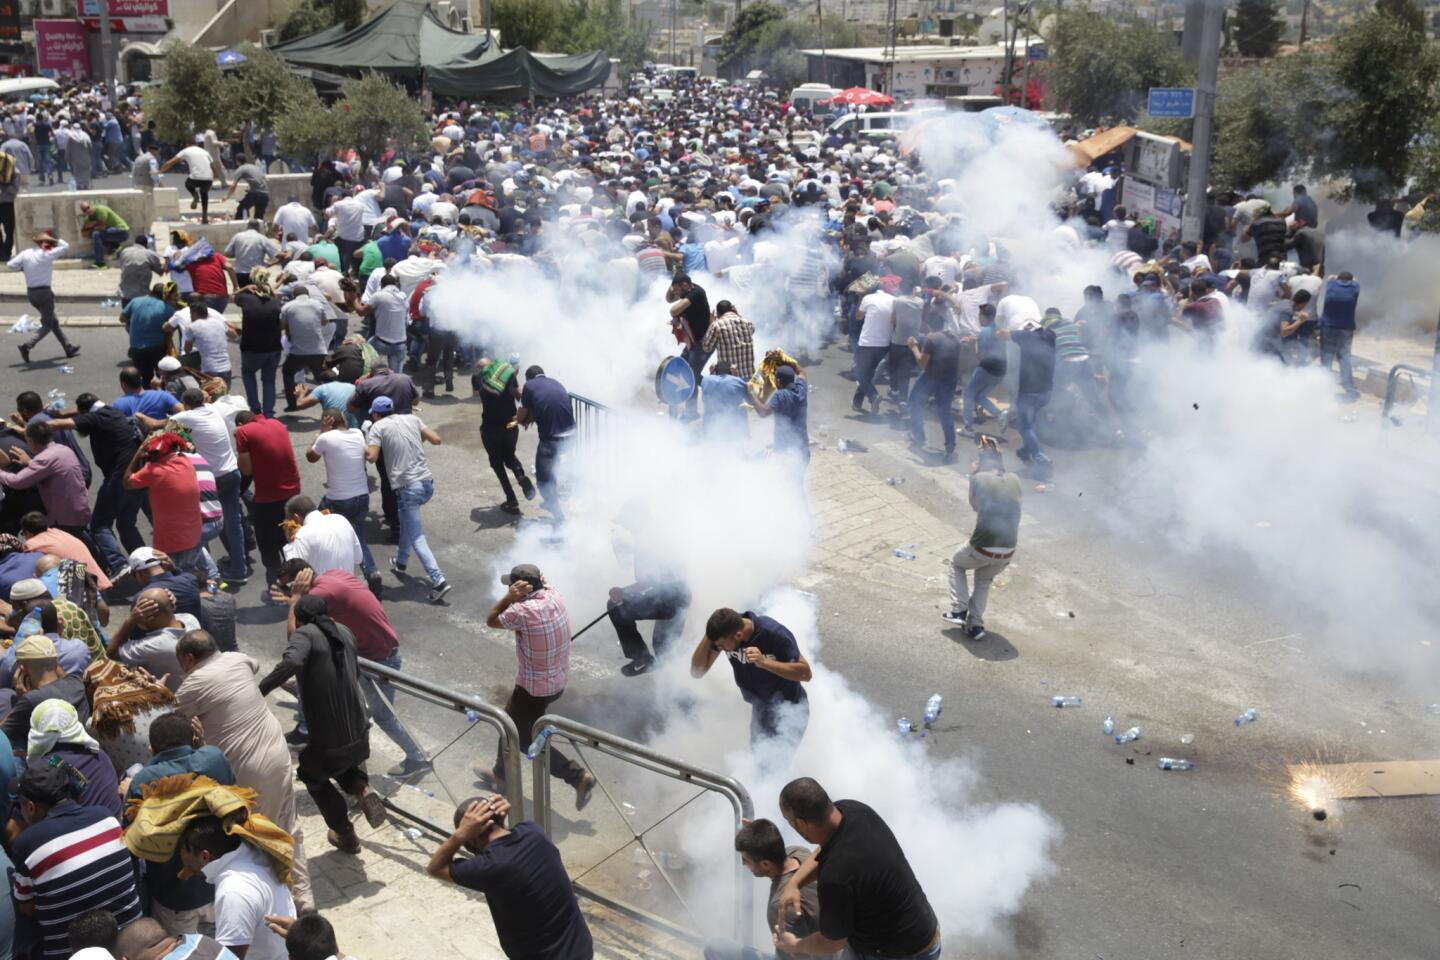 Palestinian protesters are driven back by tear gas fired by Israeli police officers outside Jerusalem's Old City.